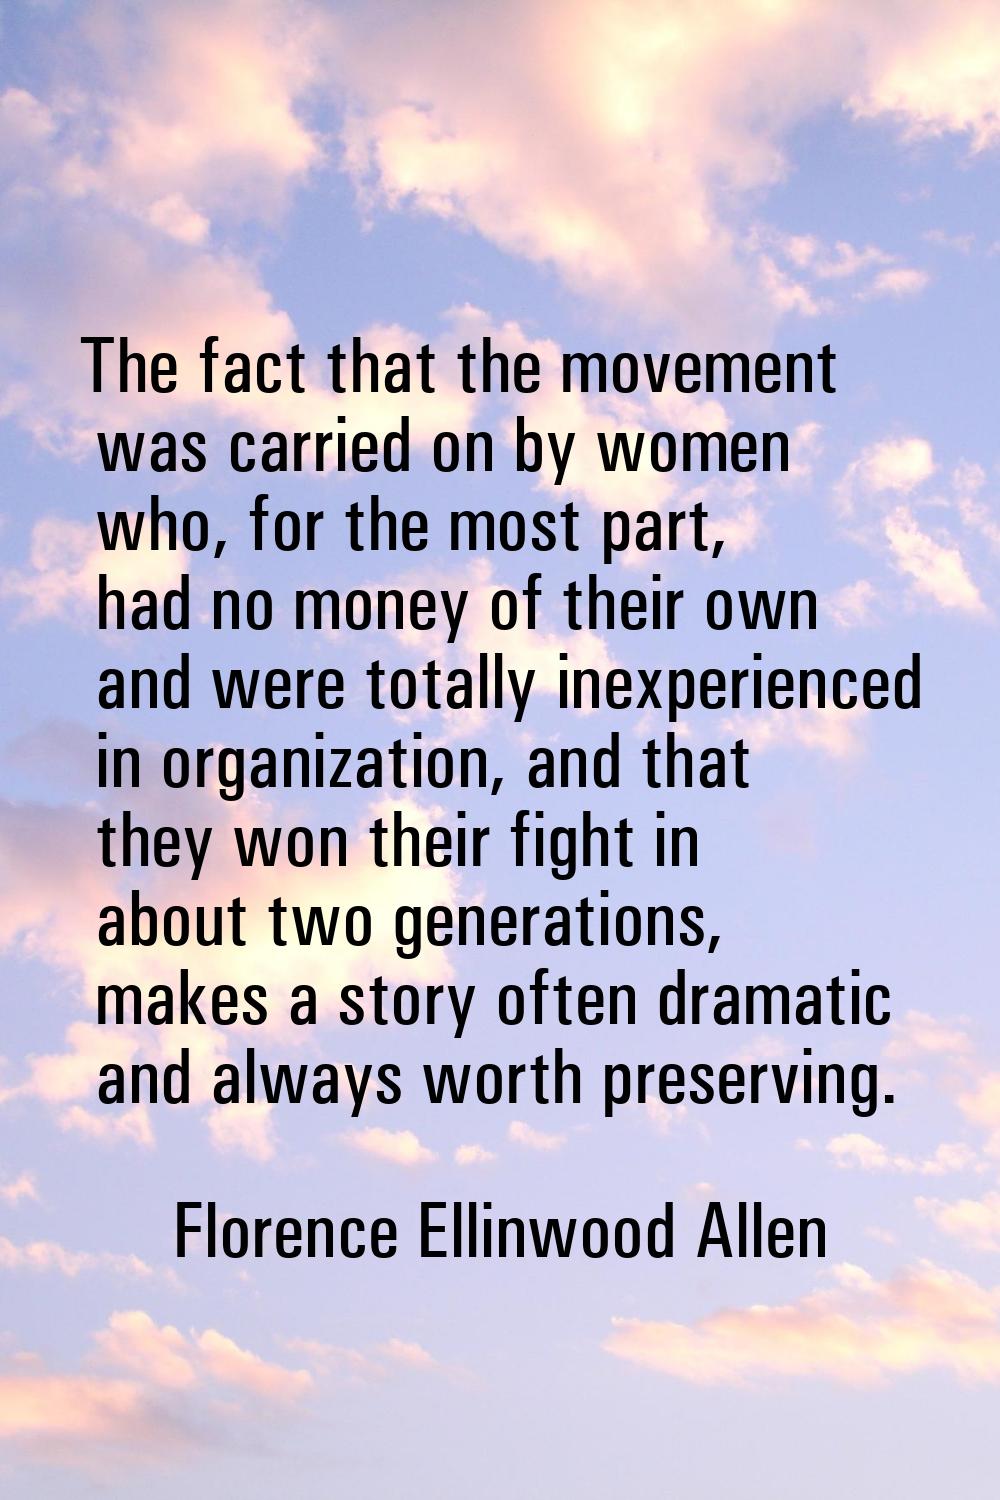 The fact that the movement was carried on by women who, for the most part, had no money of their ow